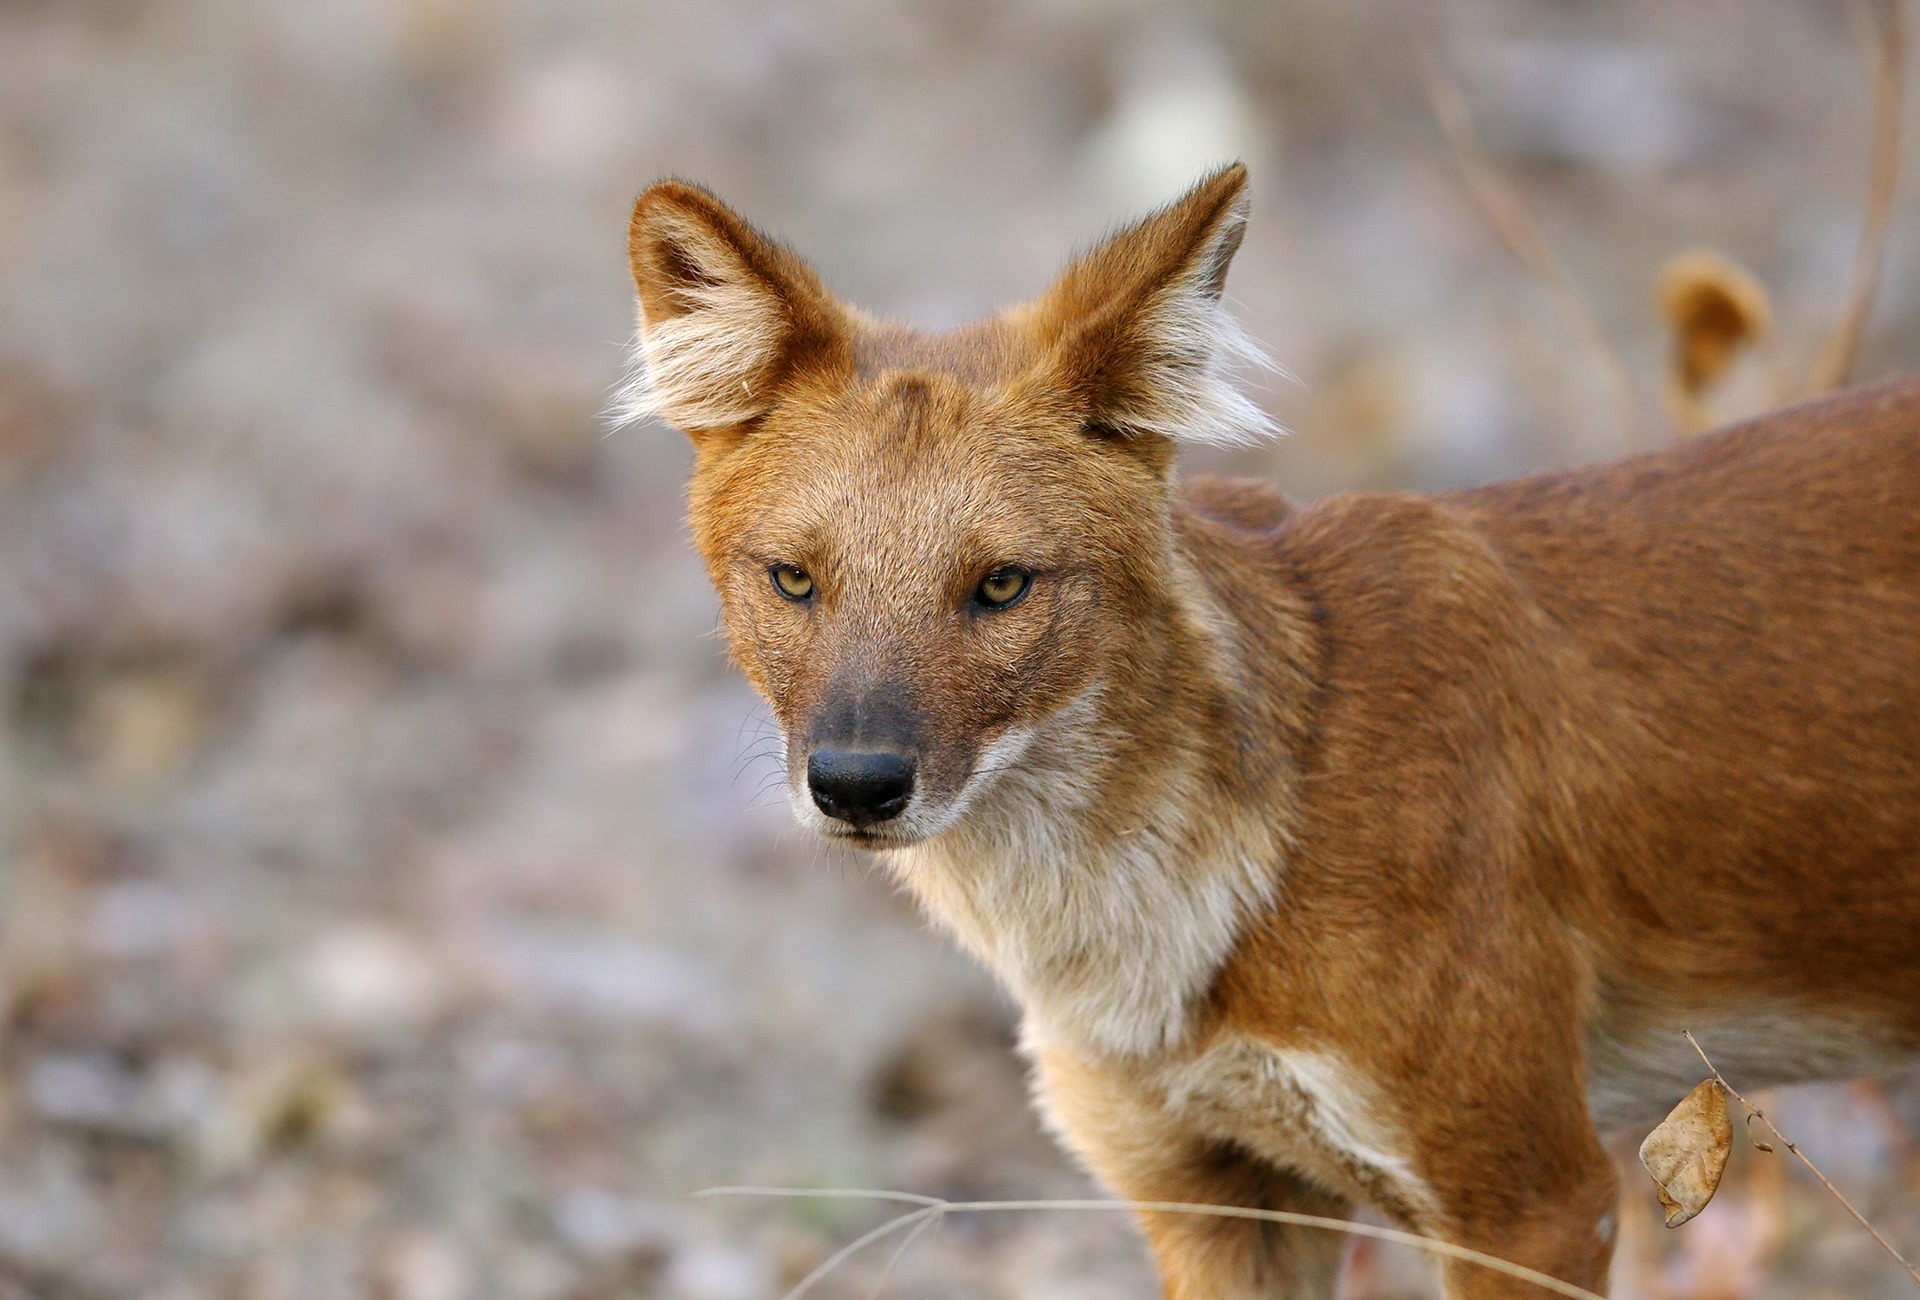 The Endangered Dhole, or Asiatic Wild Dog, by Dr. Ajay Kumar Singh